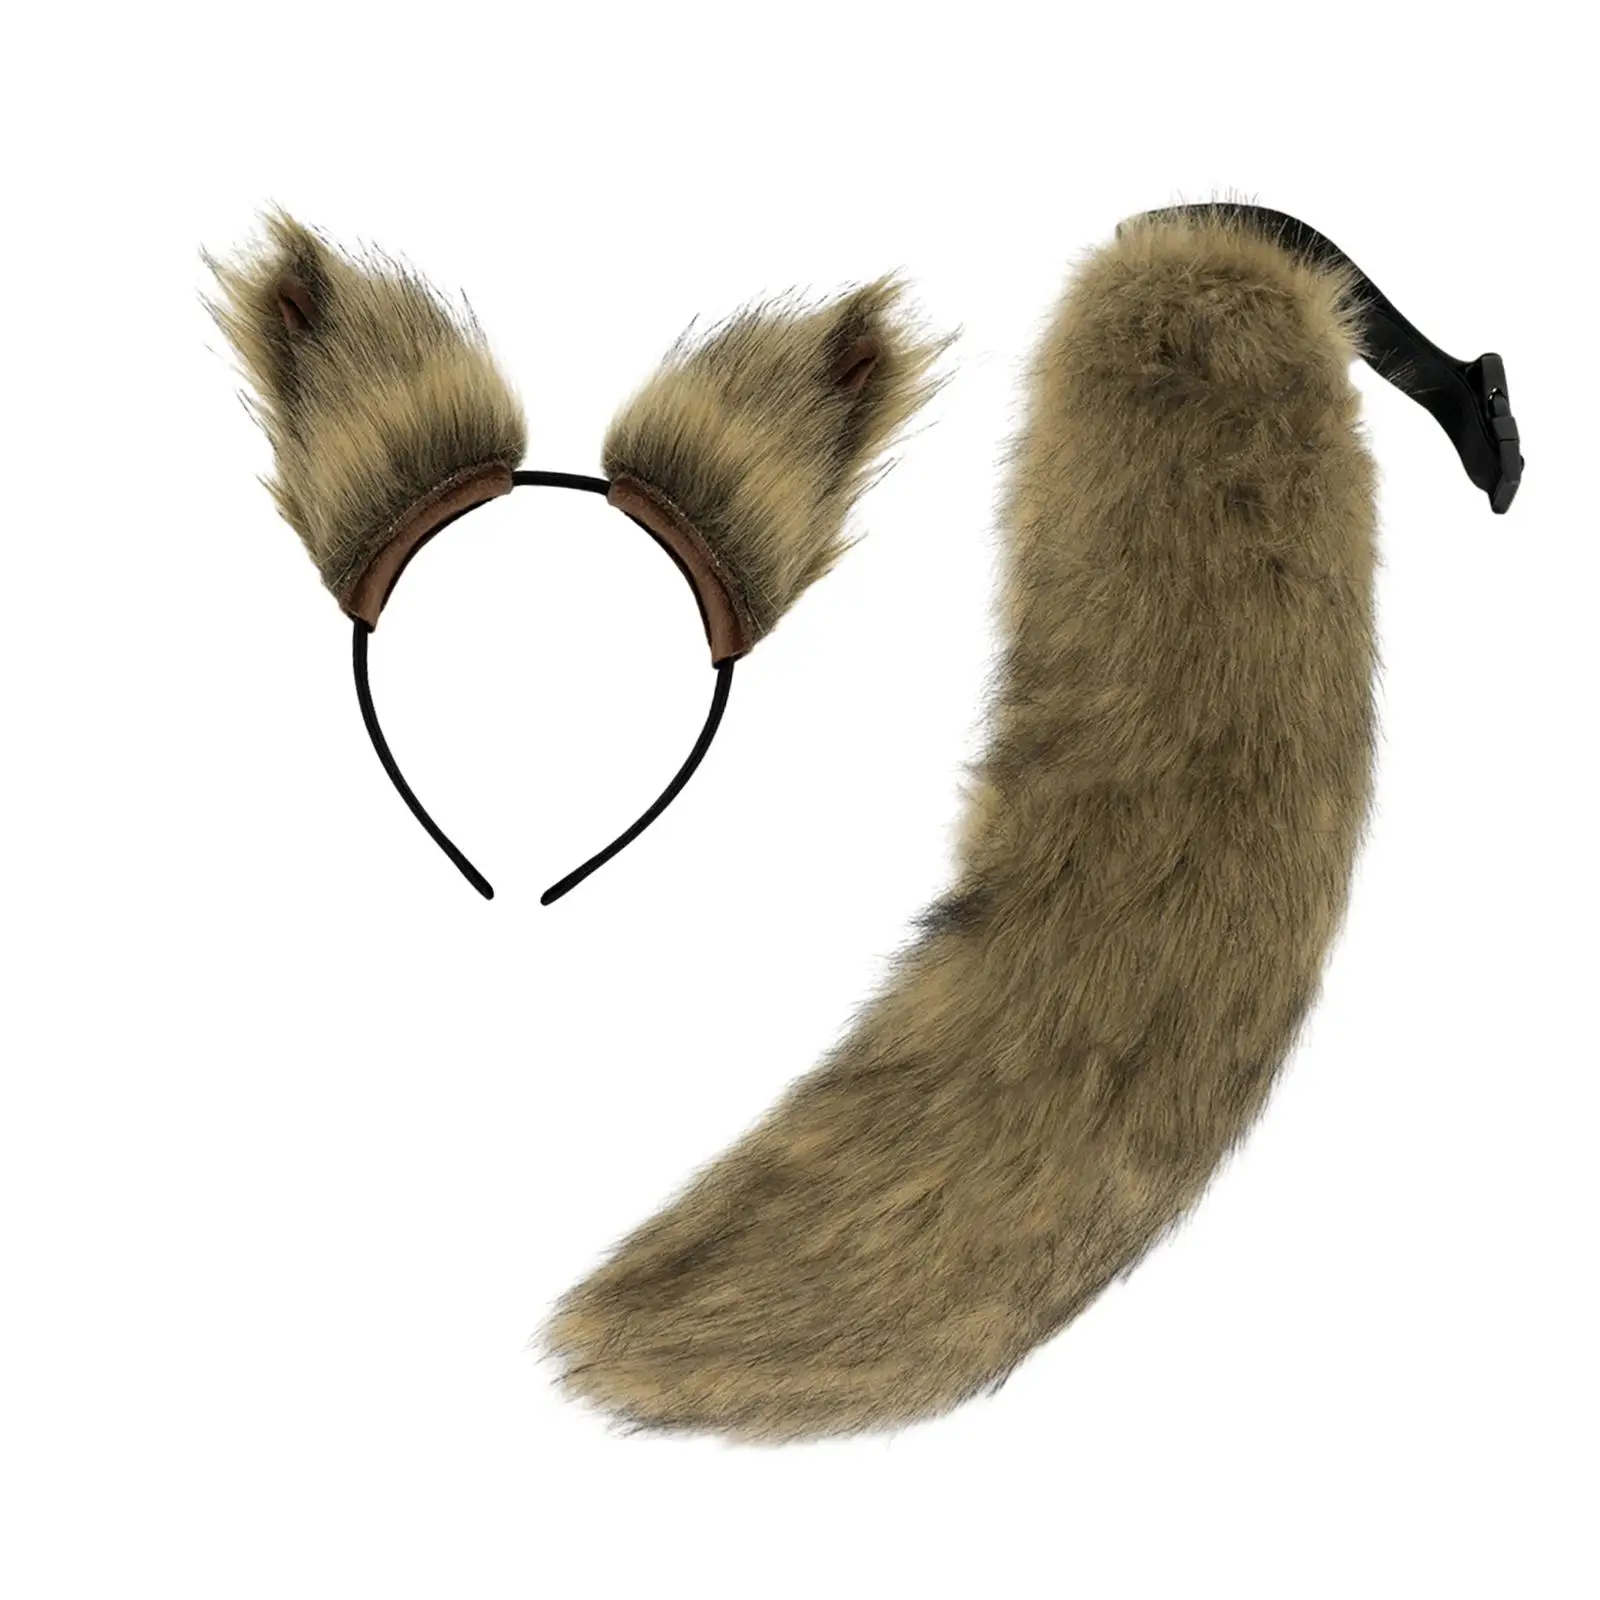 Animals Ears and Tail Set Animals Themed Parties Fancy Dress for Birthday Festival Stage Performance Night Club Party Supplies